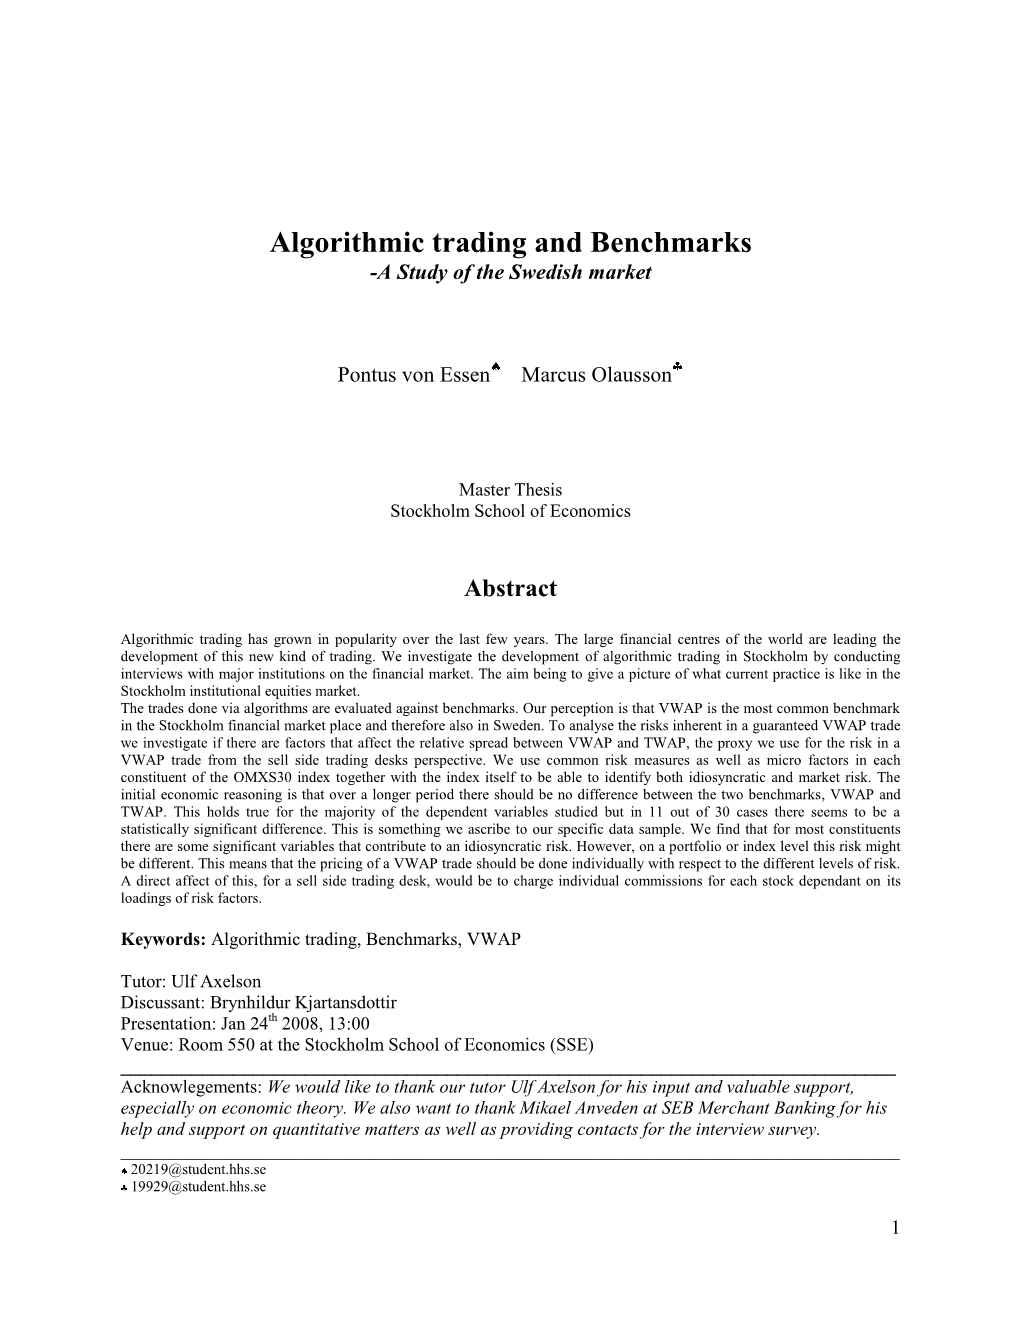 Algorithmic Trading and Benchmarks -A Study of the Swedish Market